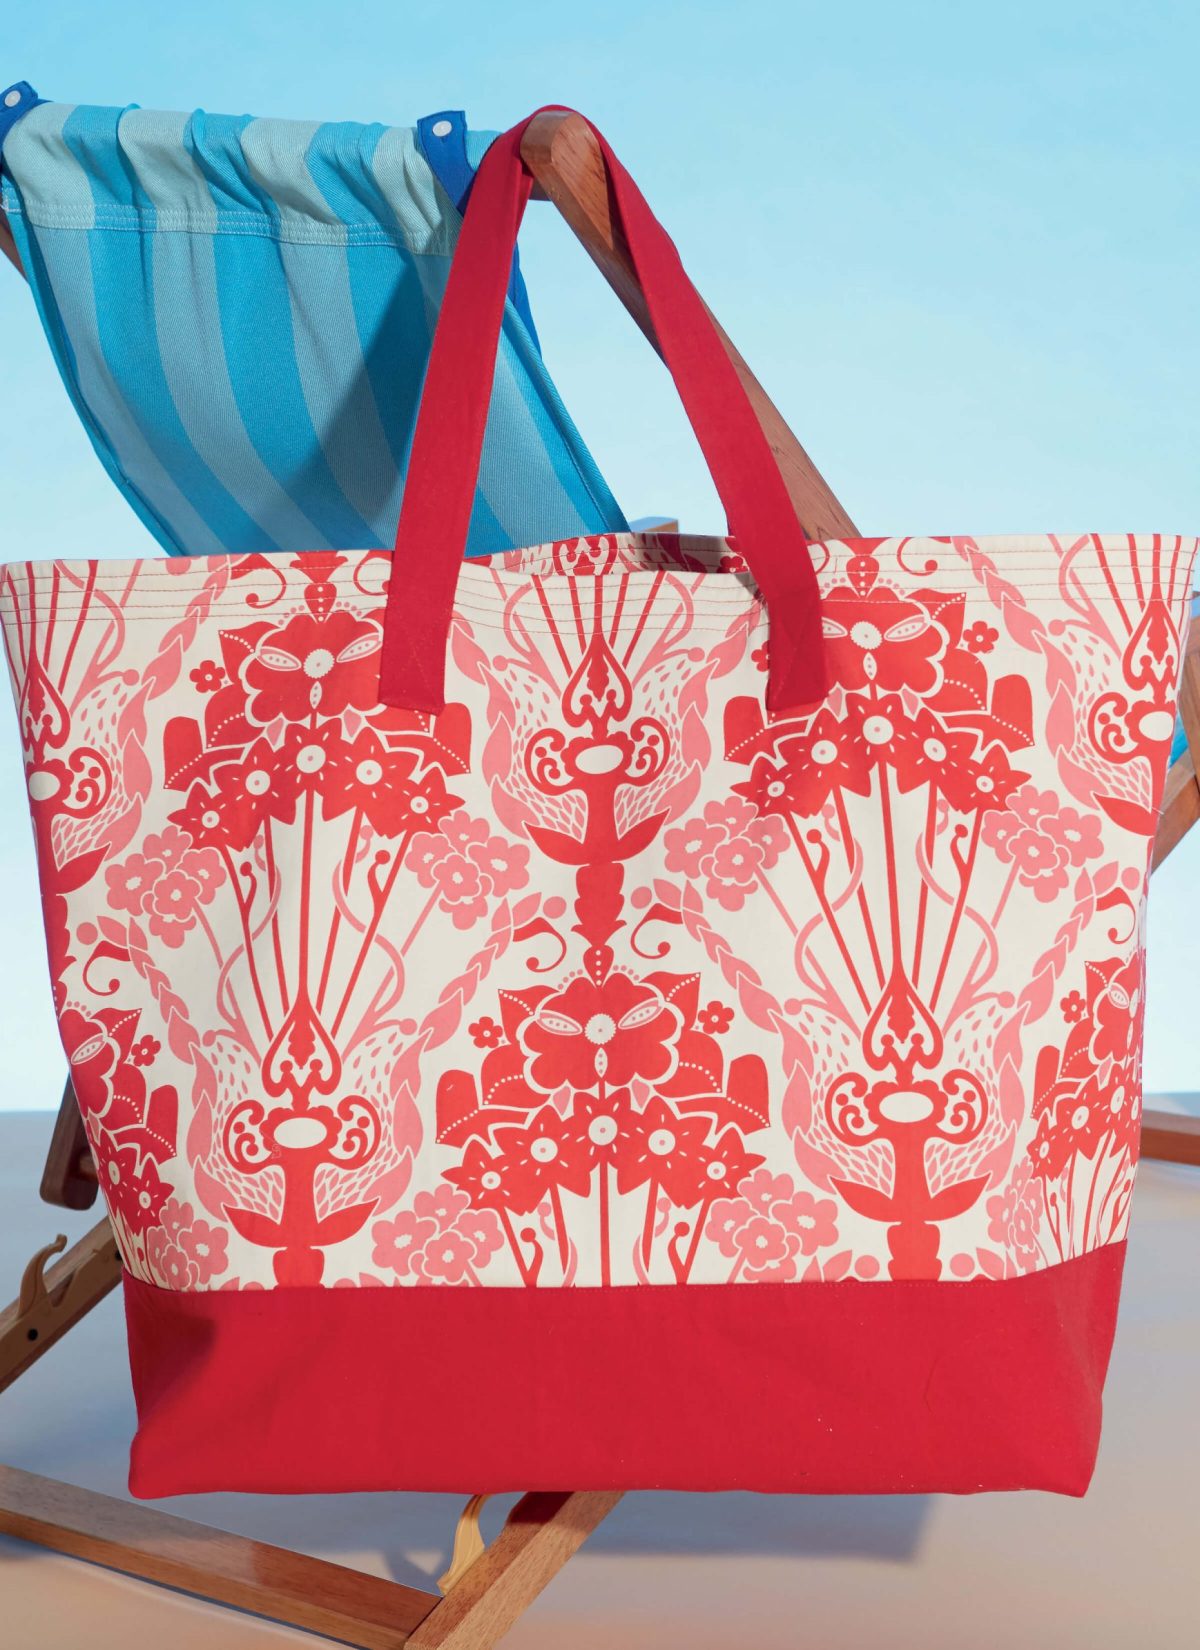 McCall's Sewing Pattern M7611 Misses' Lined Tote Bags with Contrast Variations